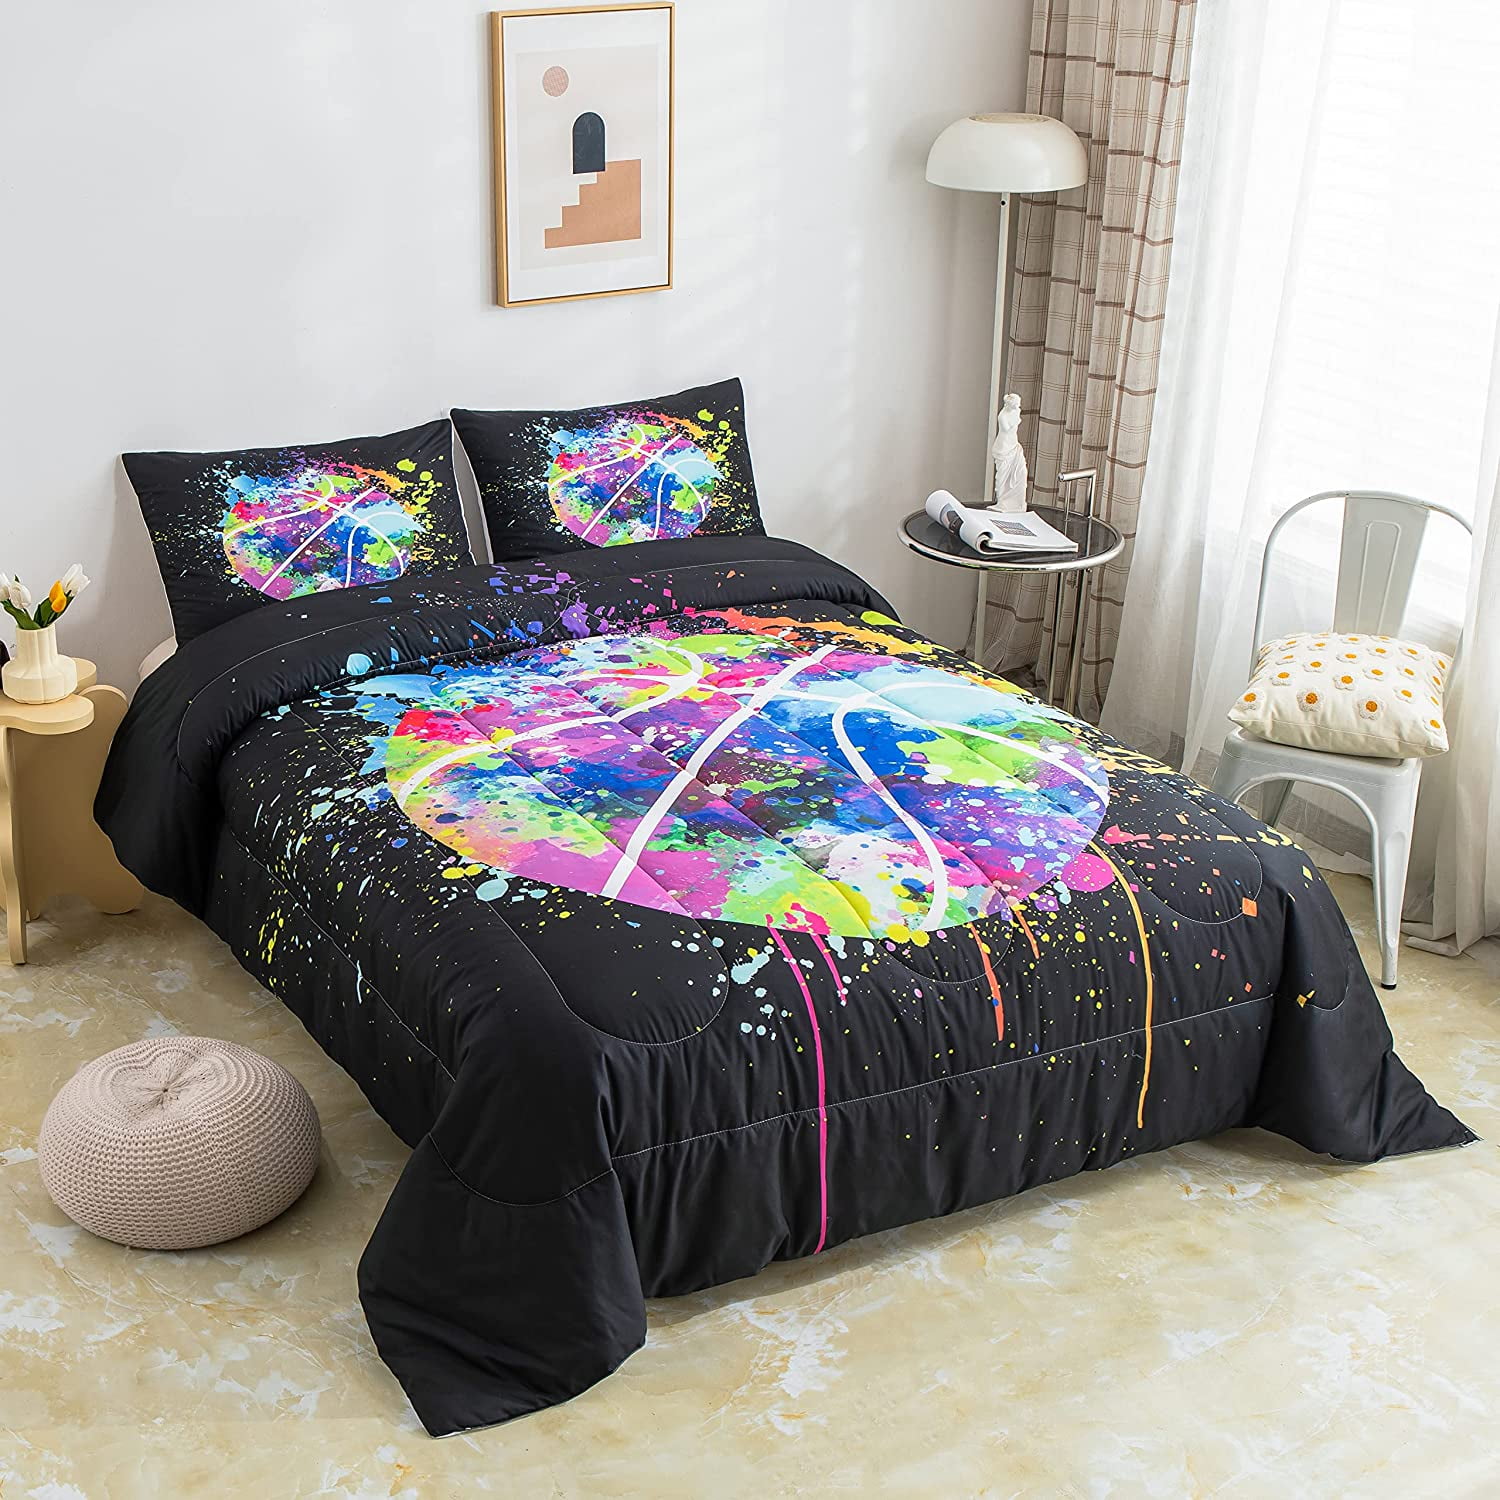  Wild Cartoon Crow Comforter Set Twin Size 2 Pcs Watercolor  Animals Natural Plants Decor Comforter for Kids Teens Gothic Style Vintage  Brown Black Plaid Bedding Set with 1 Pillowcase+1 Comforter 